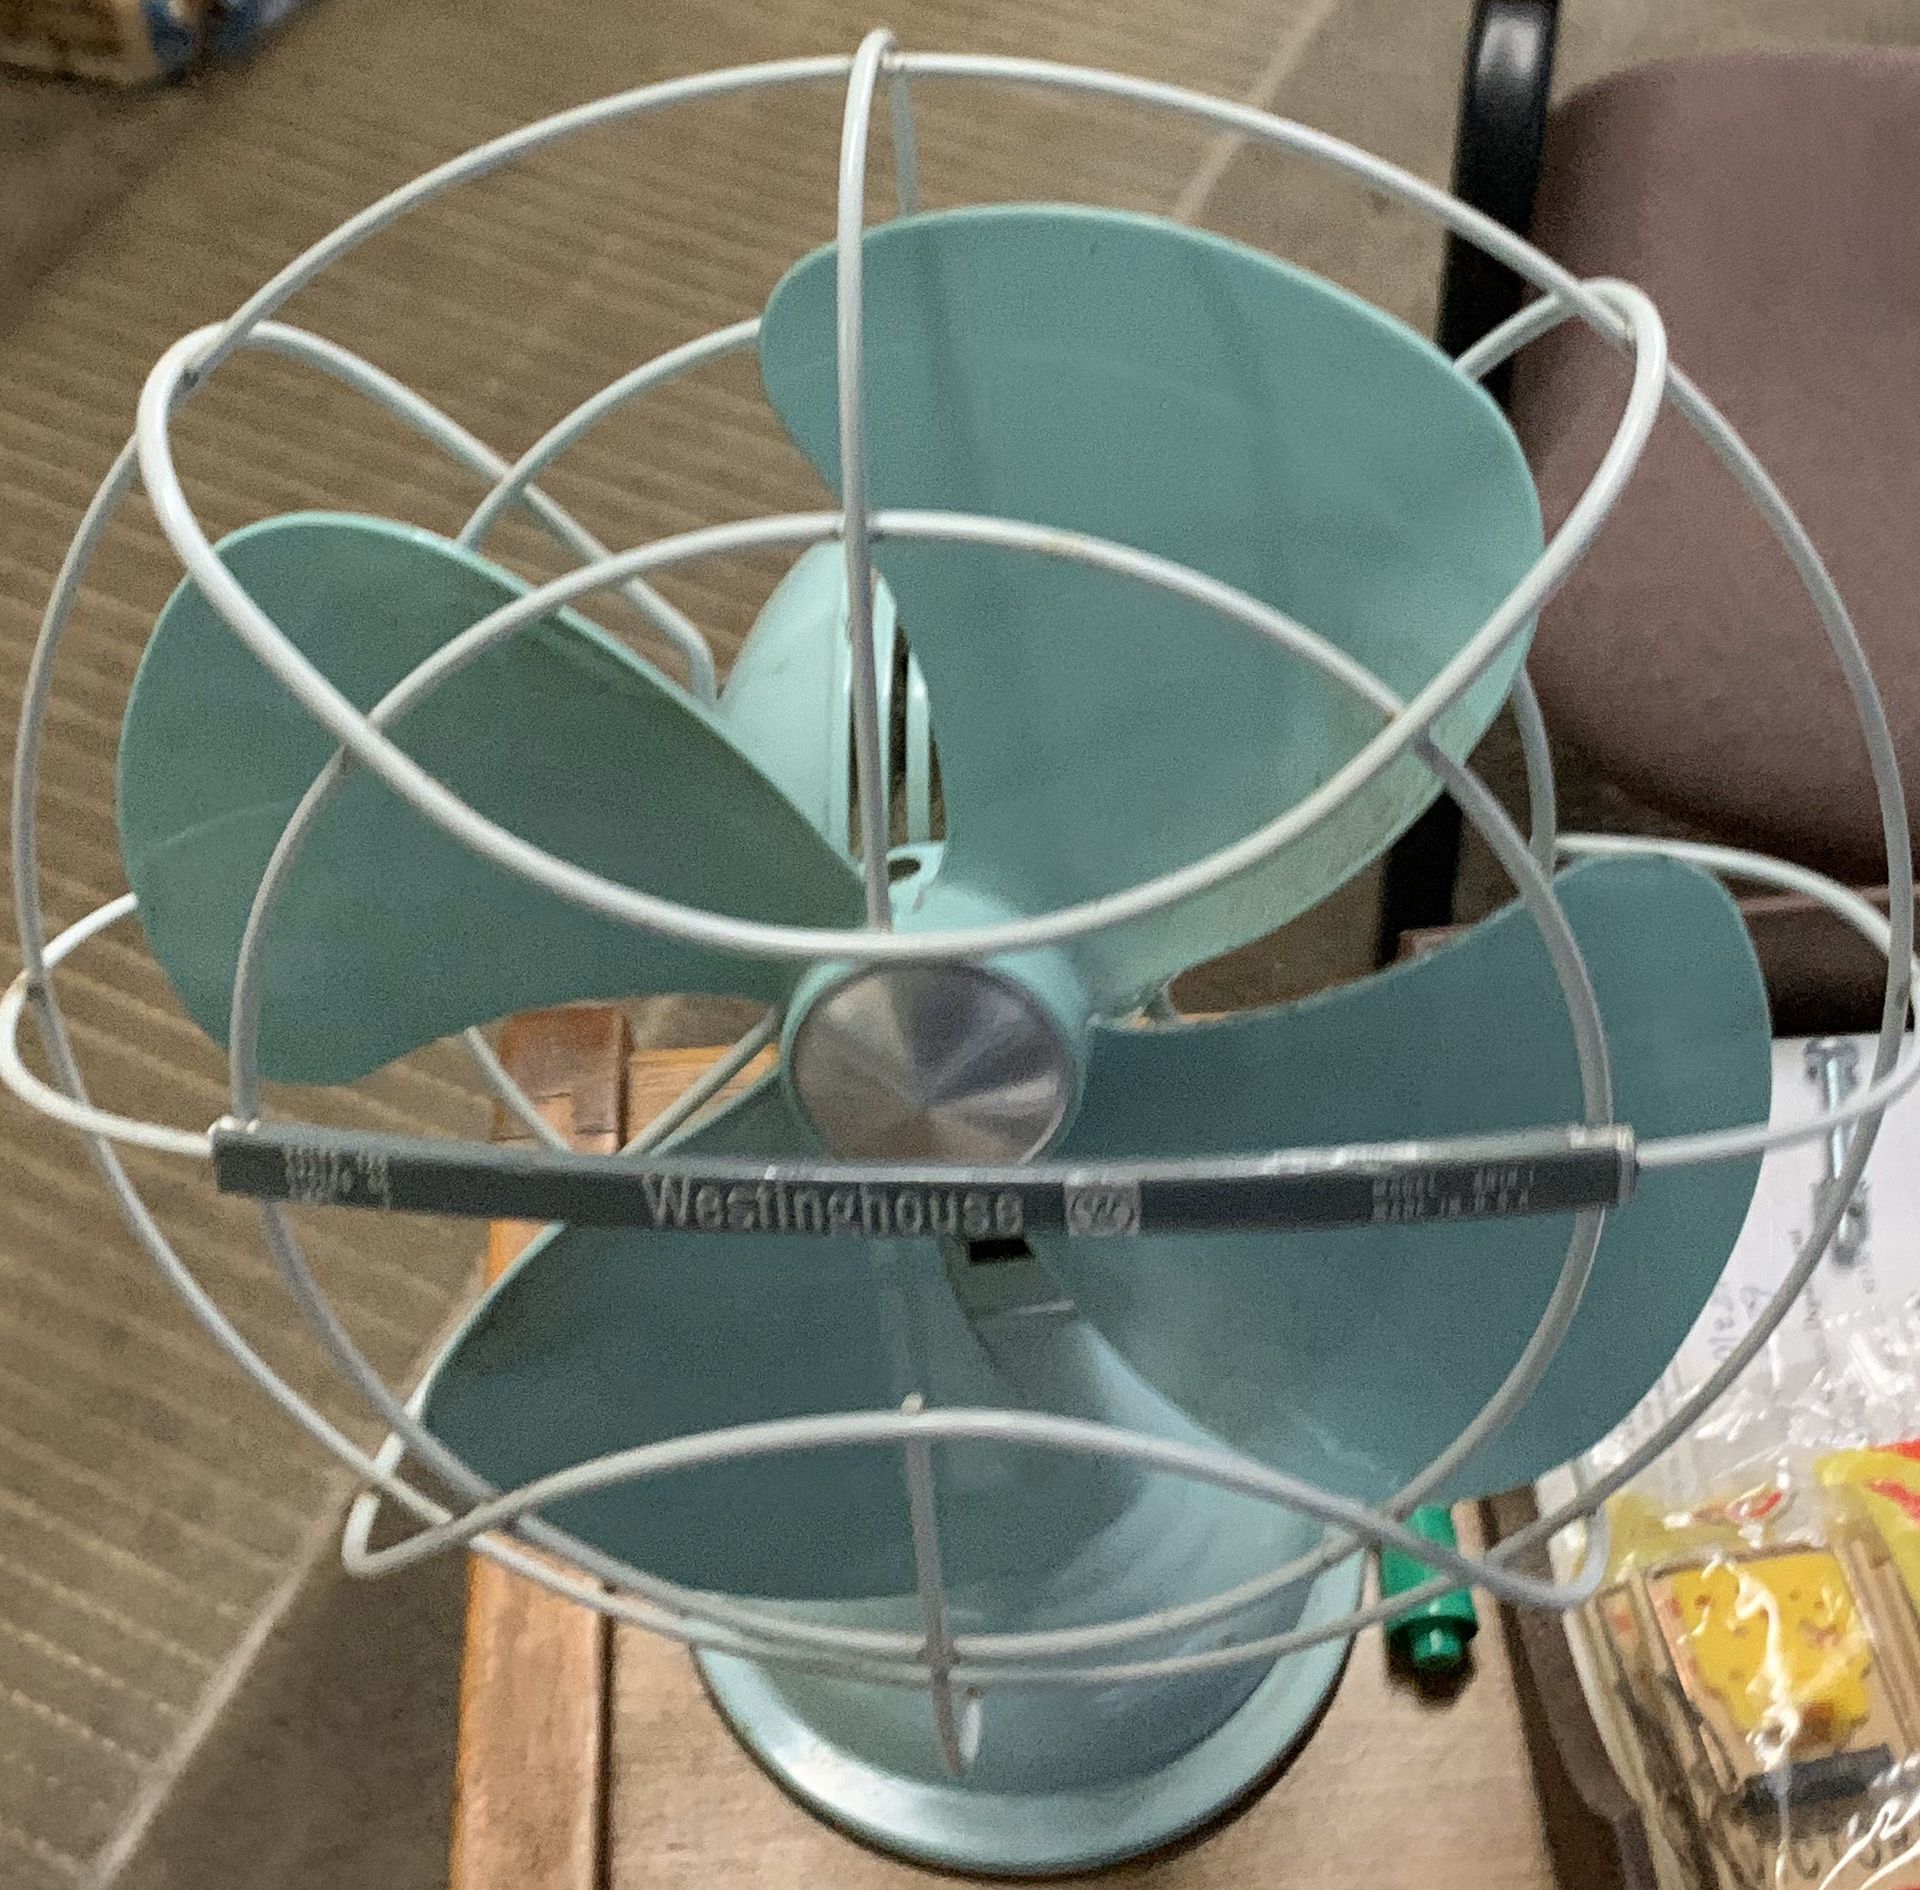 Vintage Westinghouse Oscillating Electric Fan 1950’s/1960’s USA